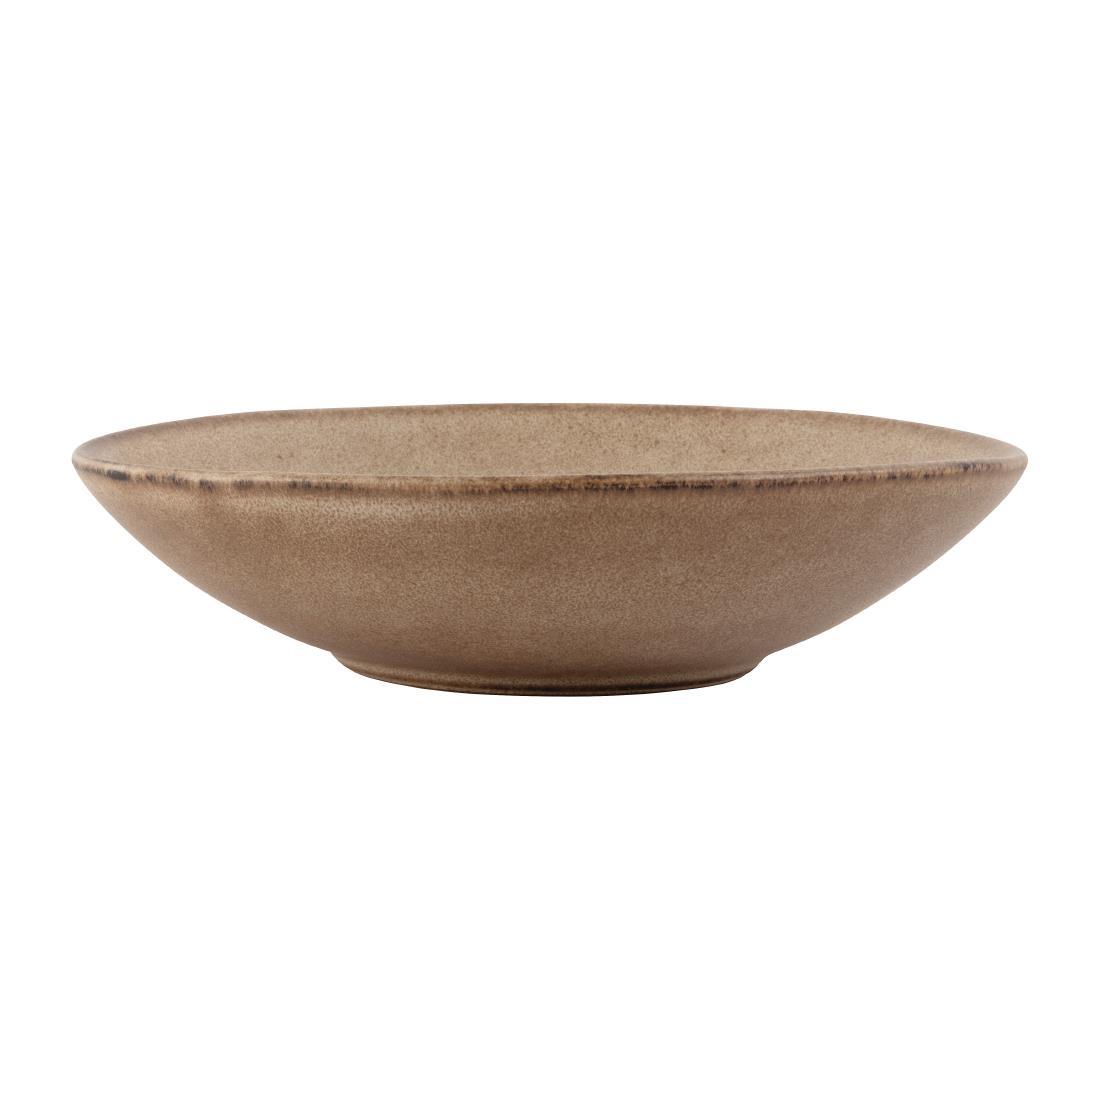 Olympia Build-a-Bowl Earth Flat Bowls 250mm (Pack of 4) - FC735  - 3